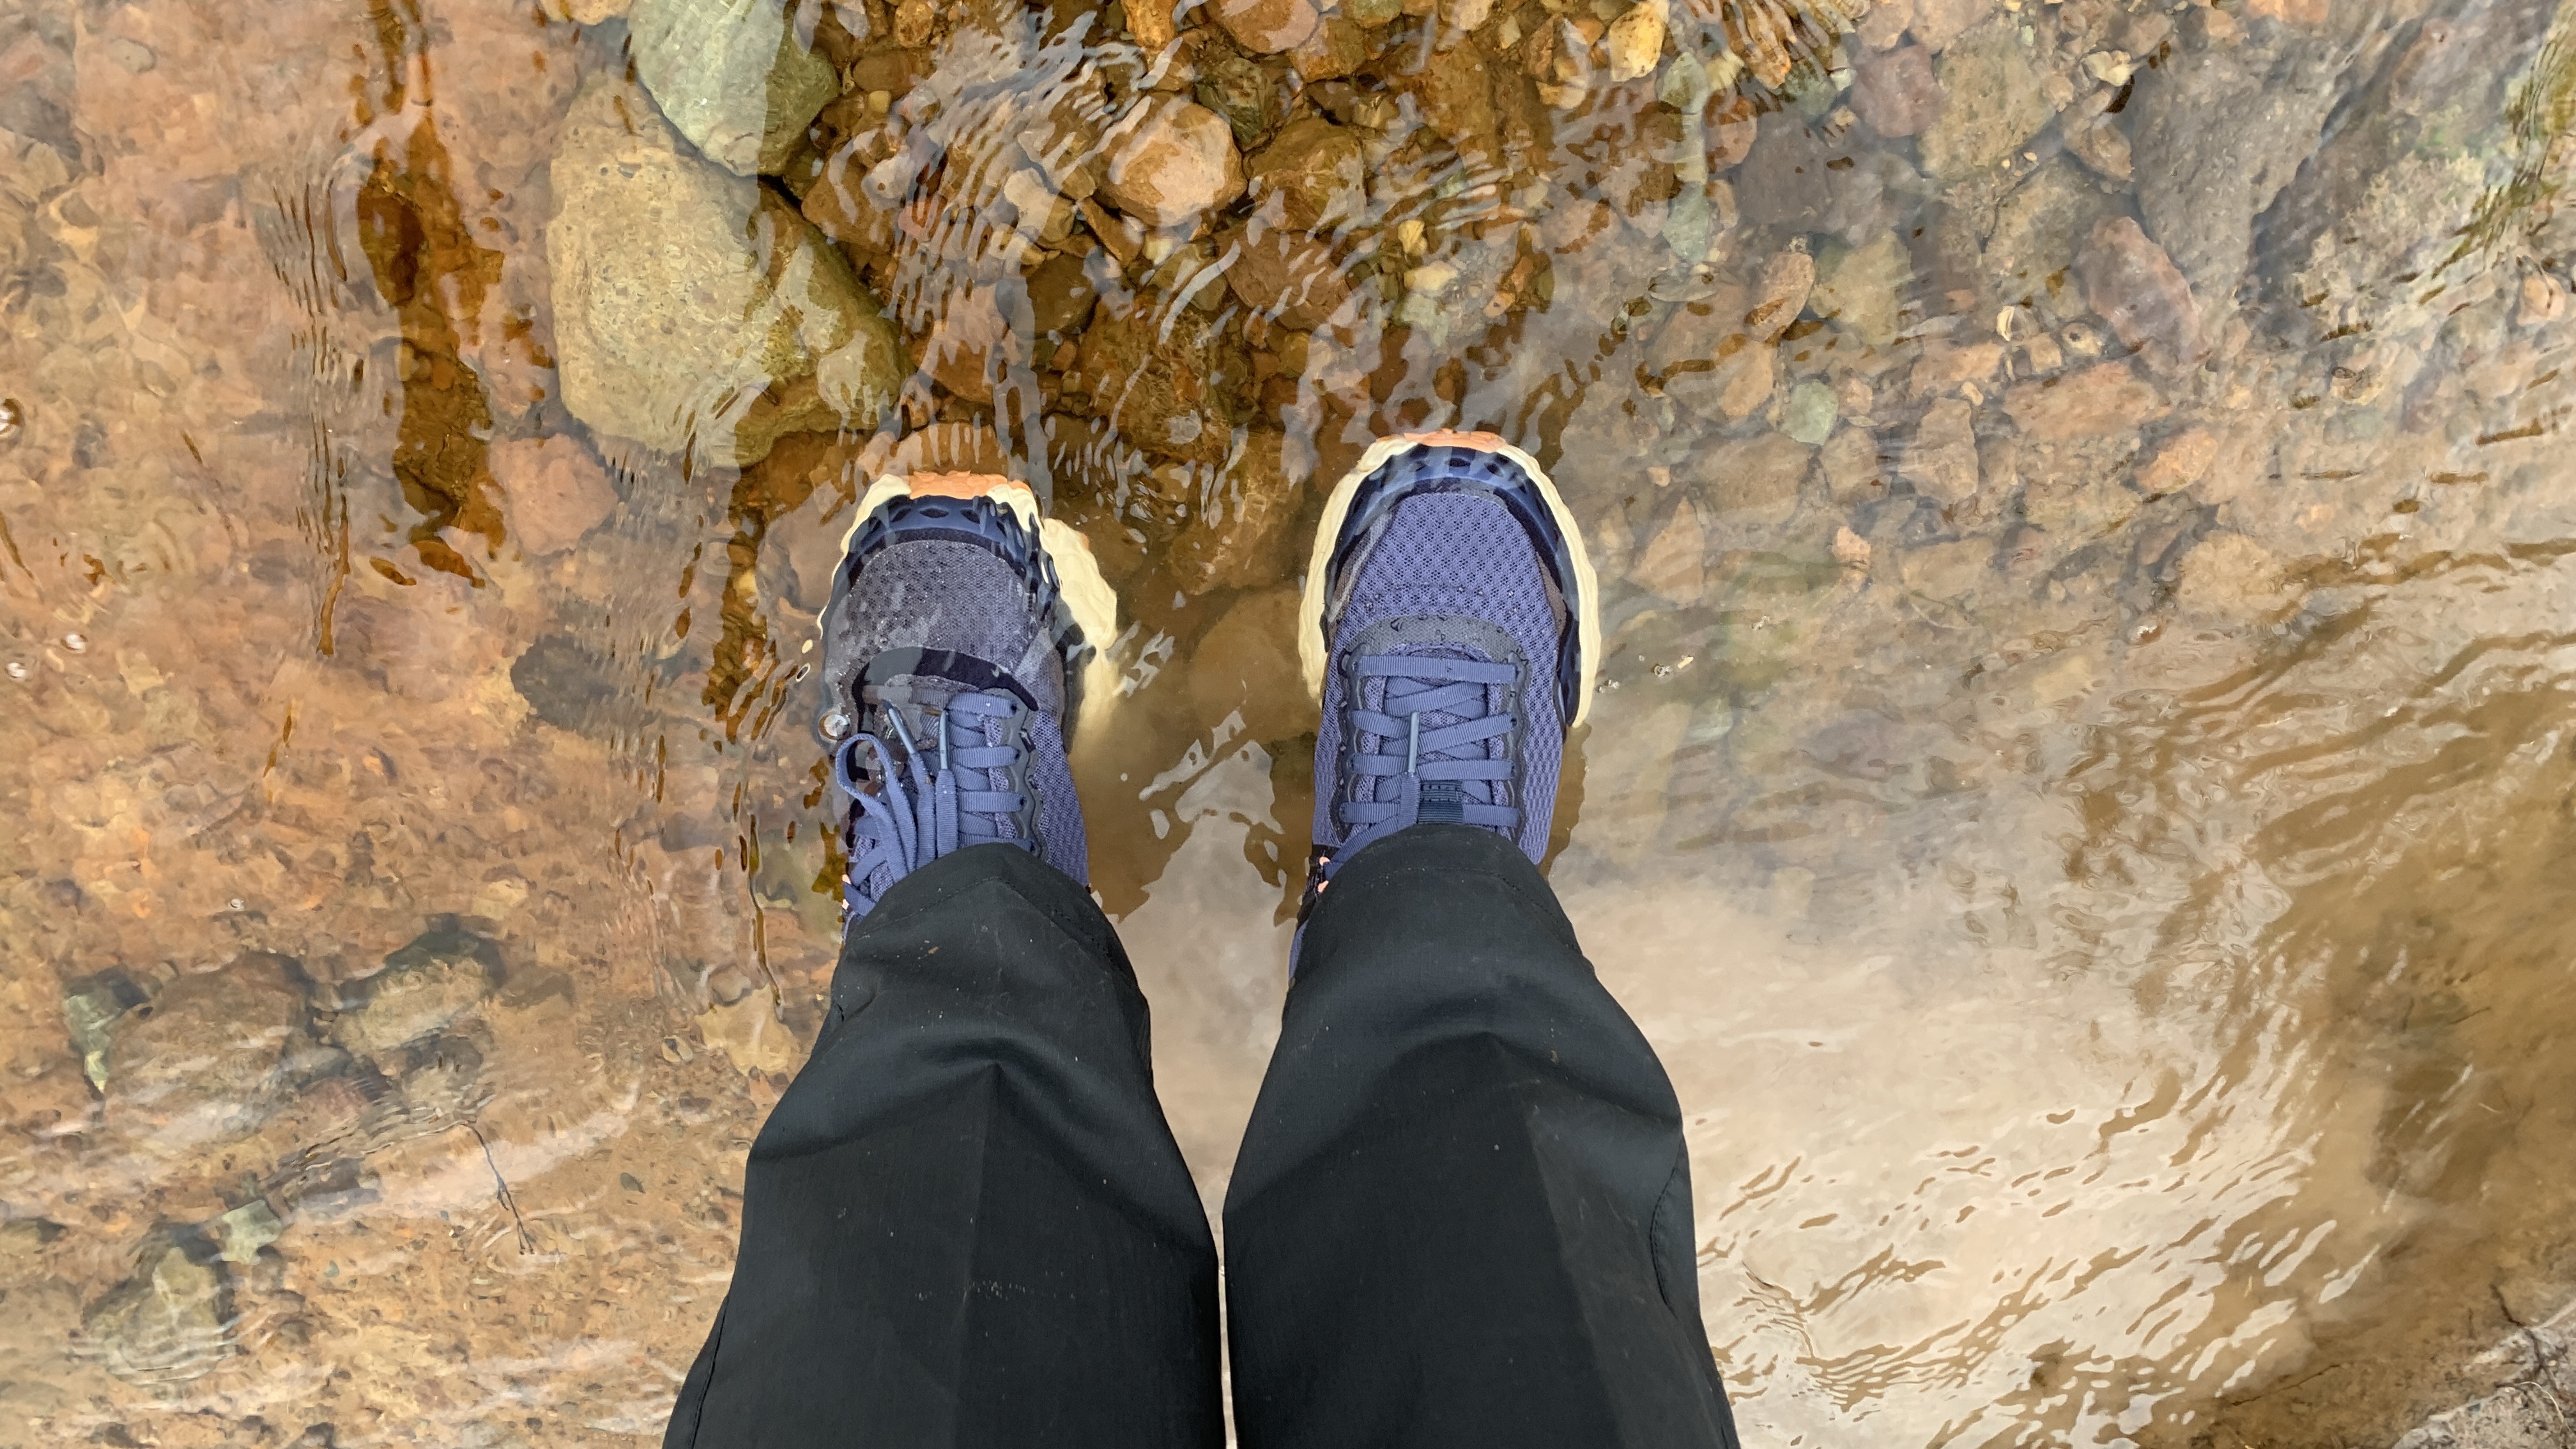 Hiking shoes in water